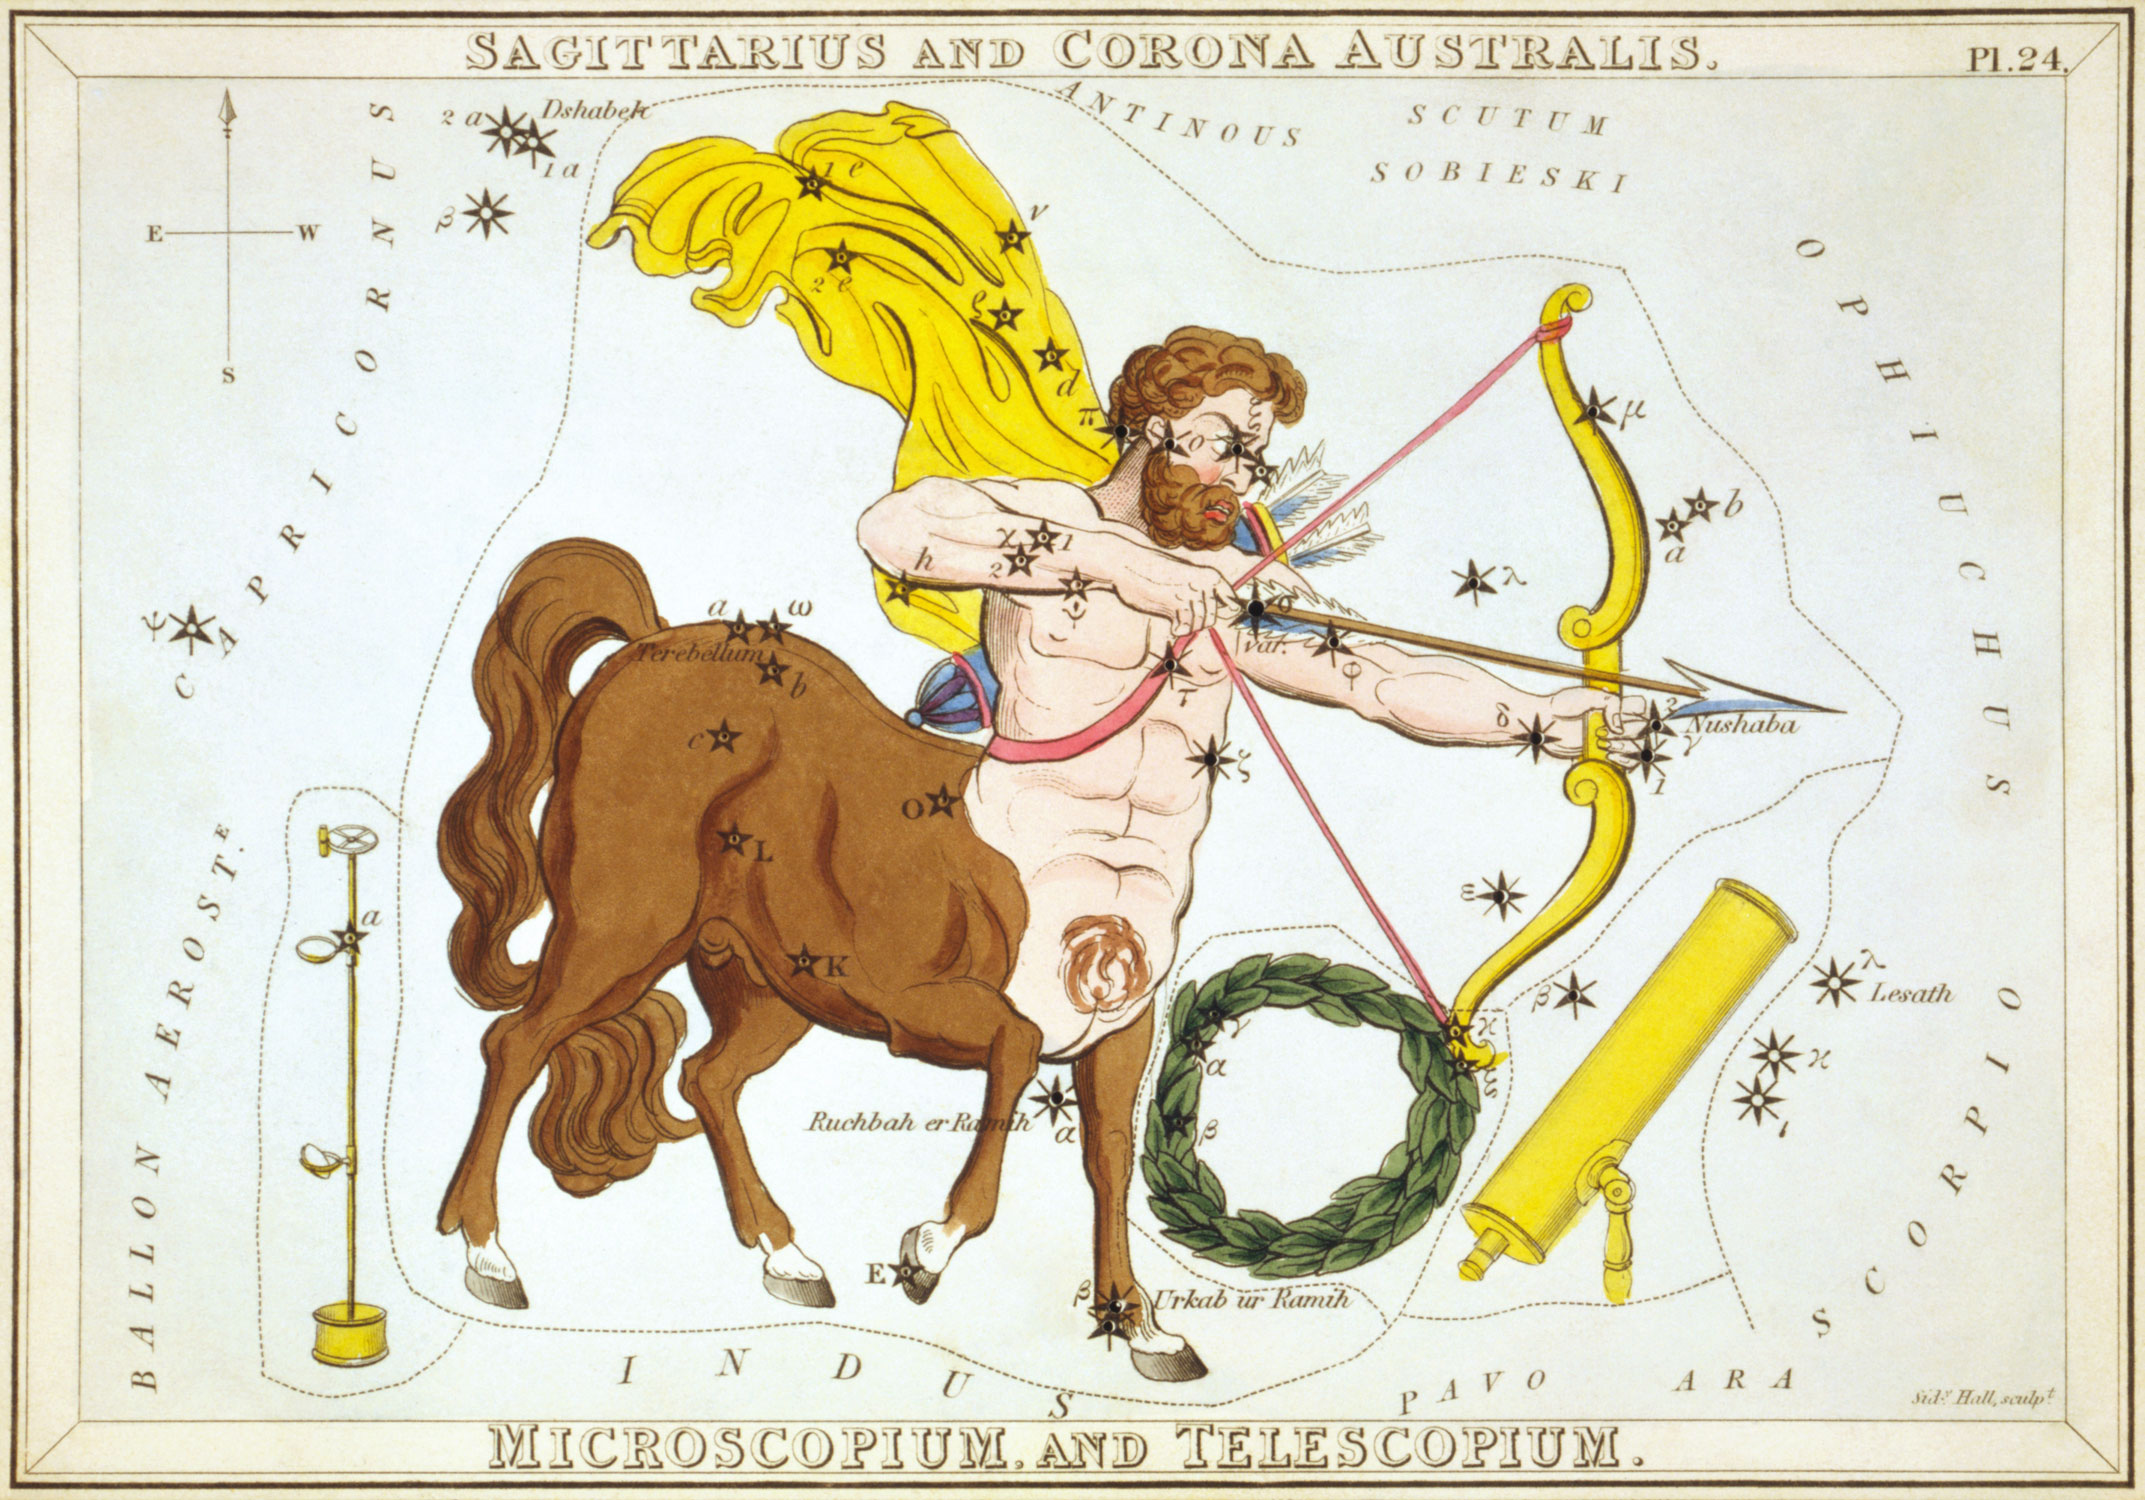   Sagittarius depicted by Jehoshaphat Aspin in a 1824 etching. Courtesy Library of Congress  via Wikimedia Commons .   